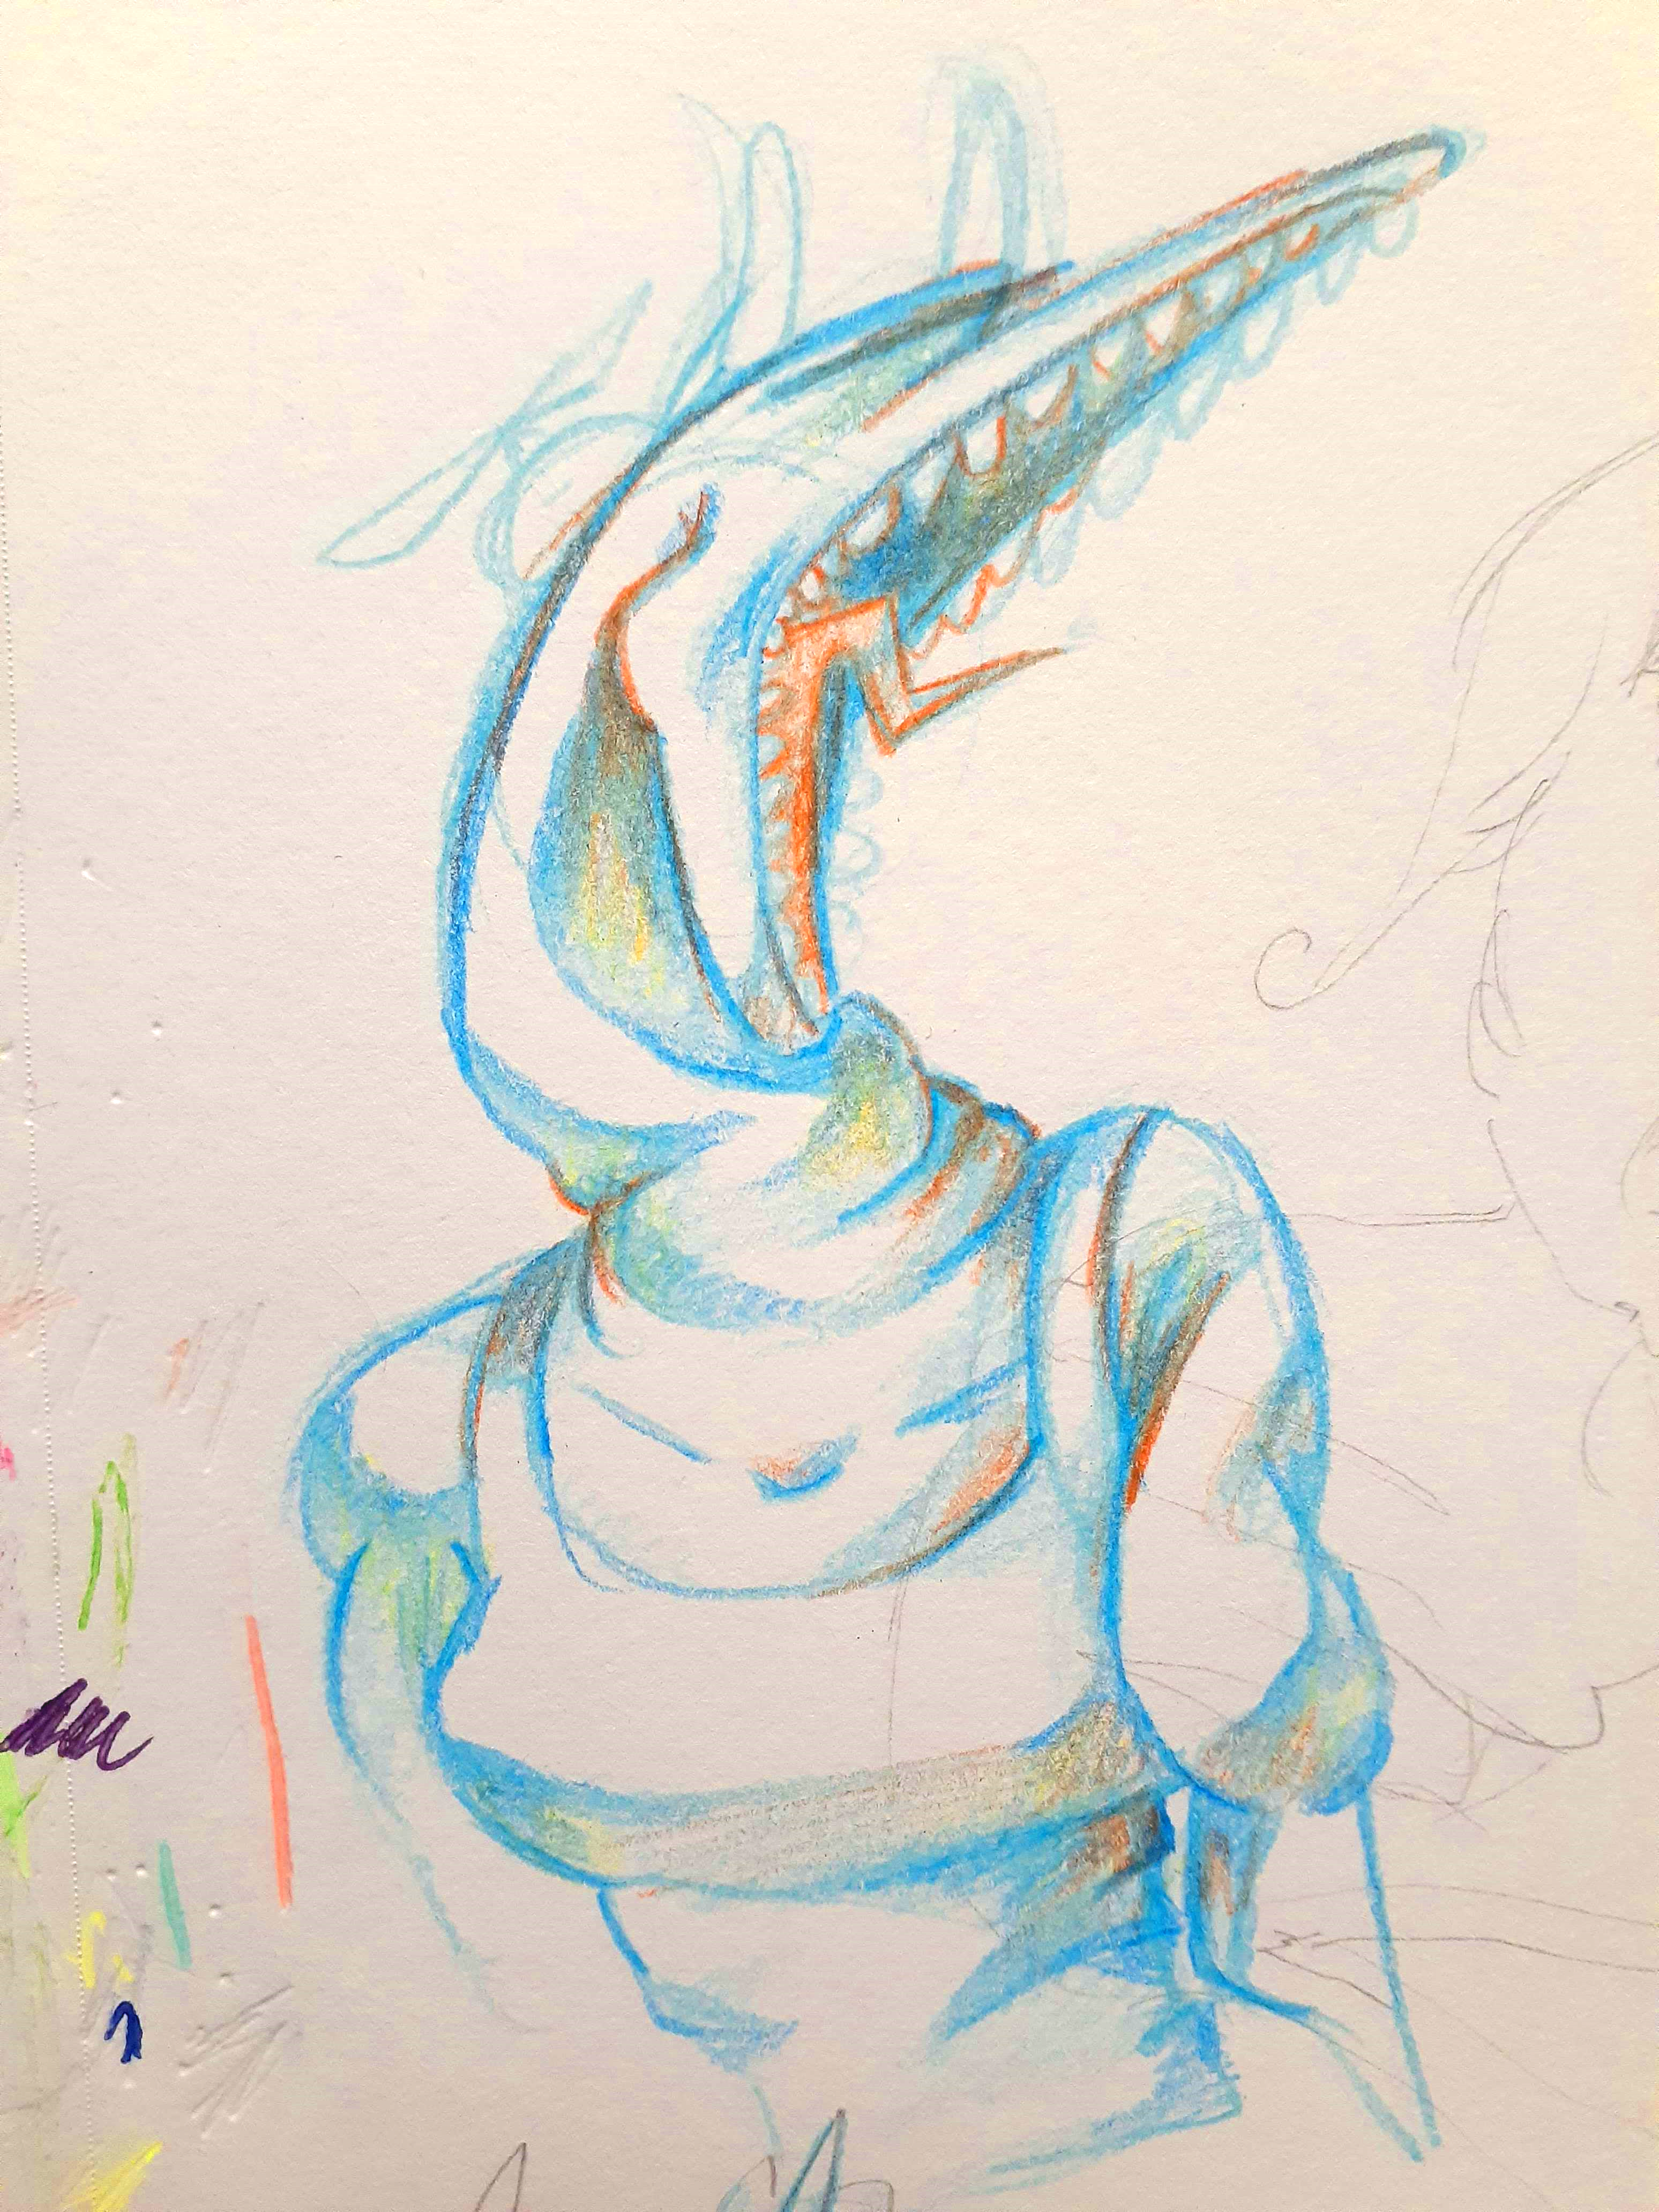 Traditional colored pencil drawing of an anthropomorphized dolphin with its mouth open.